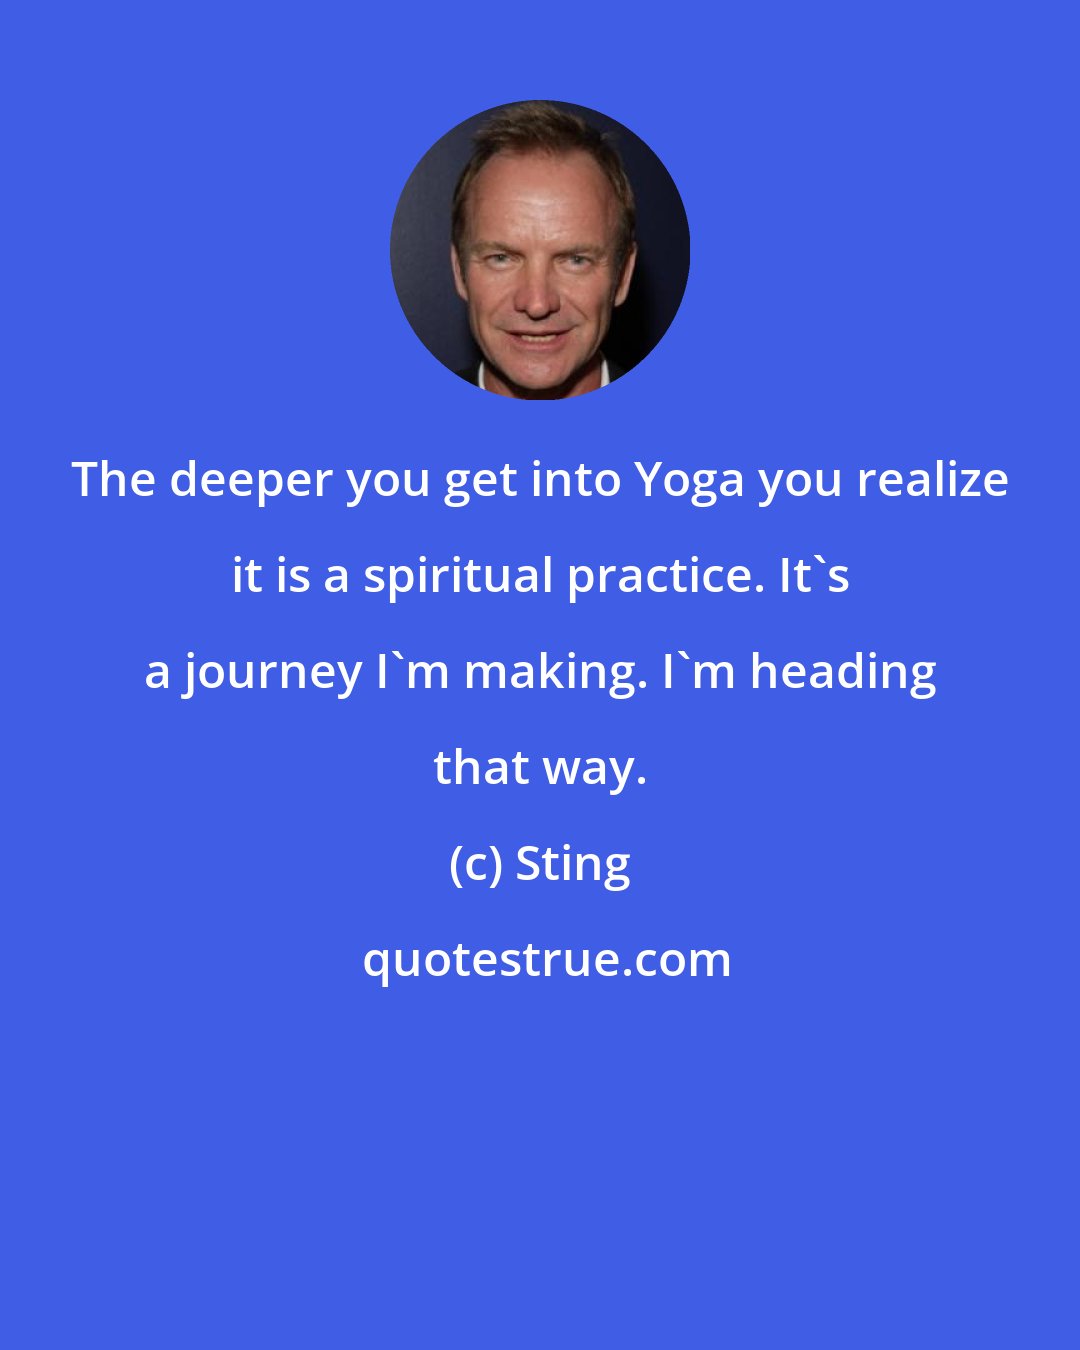 Sting: The deeper you get into Yoga you realize it is a spiritual practice. It's a journey I'm making. I'm heading that way.